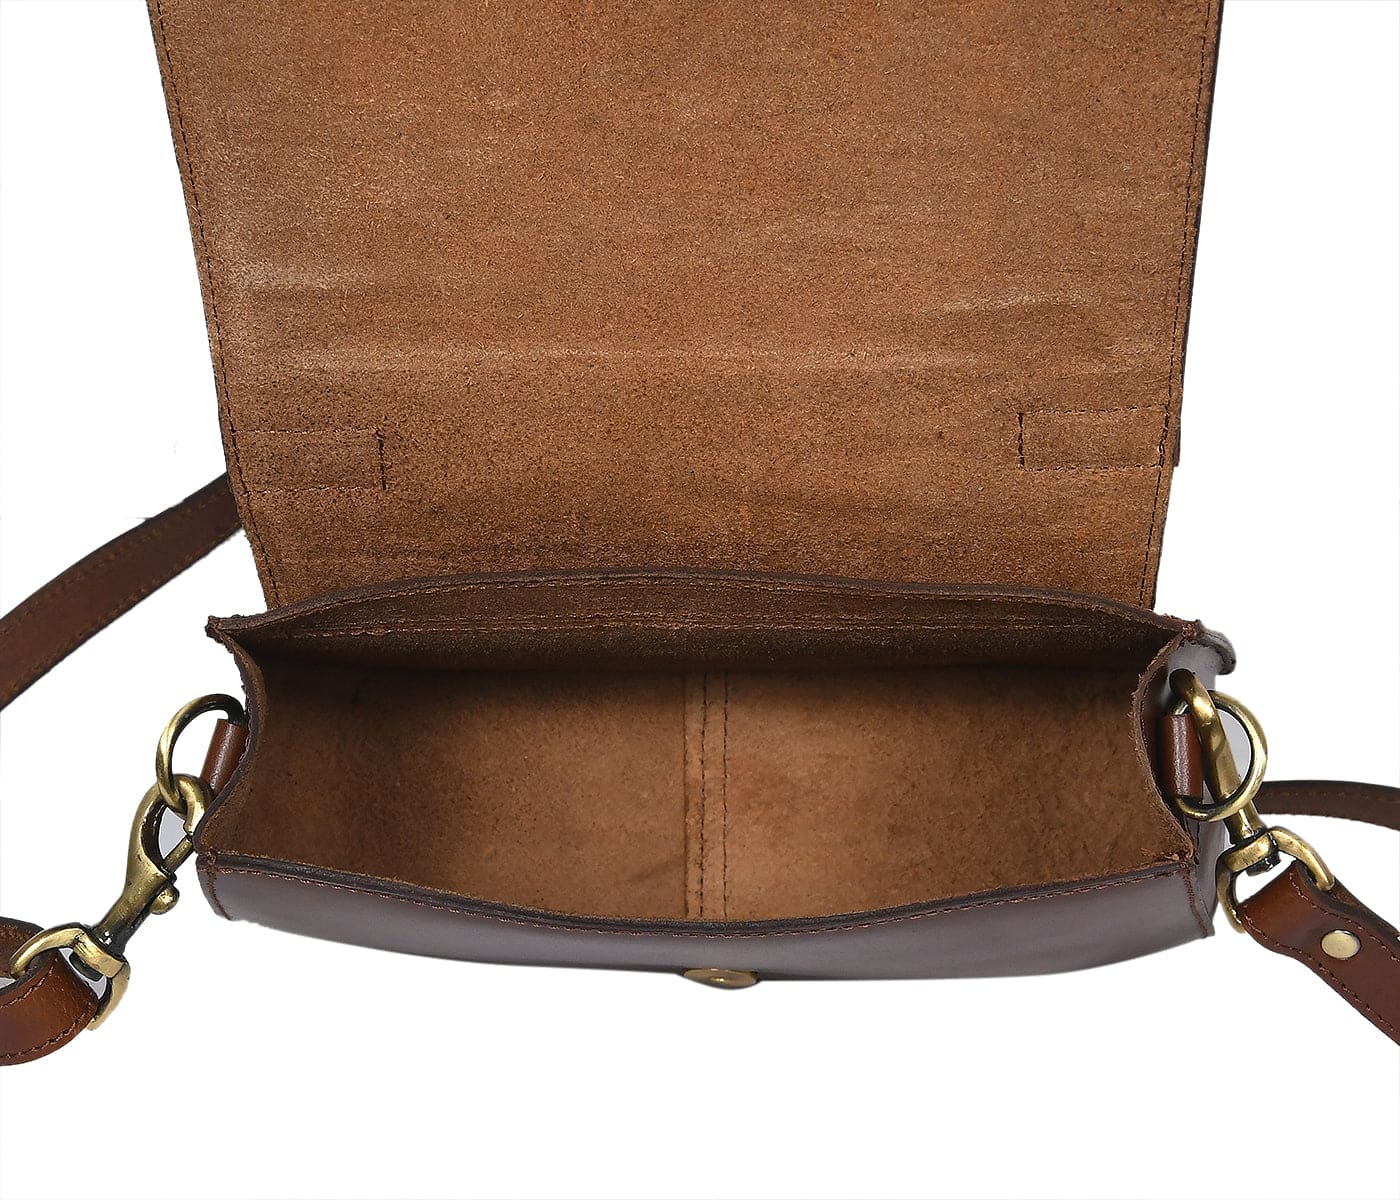 Classic Brown Leather Sling Bag - The Epitome of Style and Functionality. - CELTICINDIA